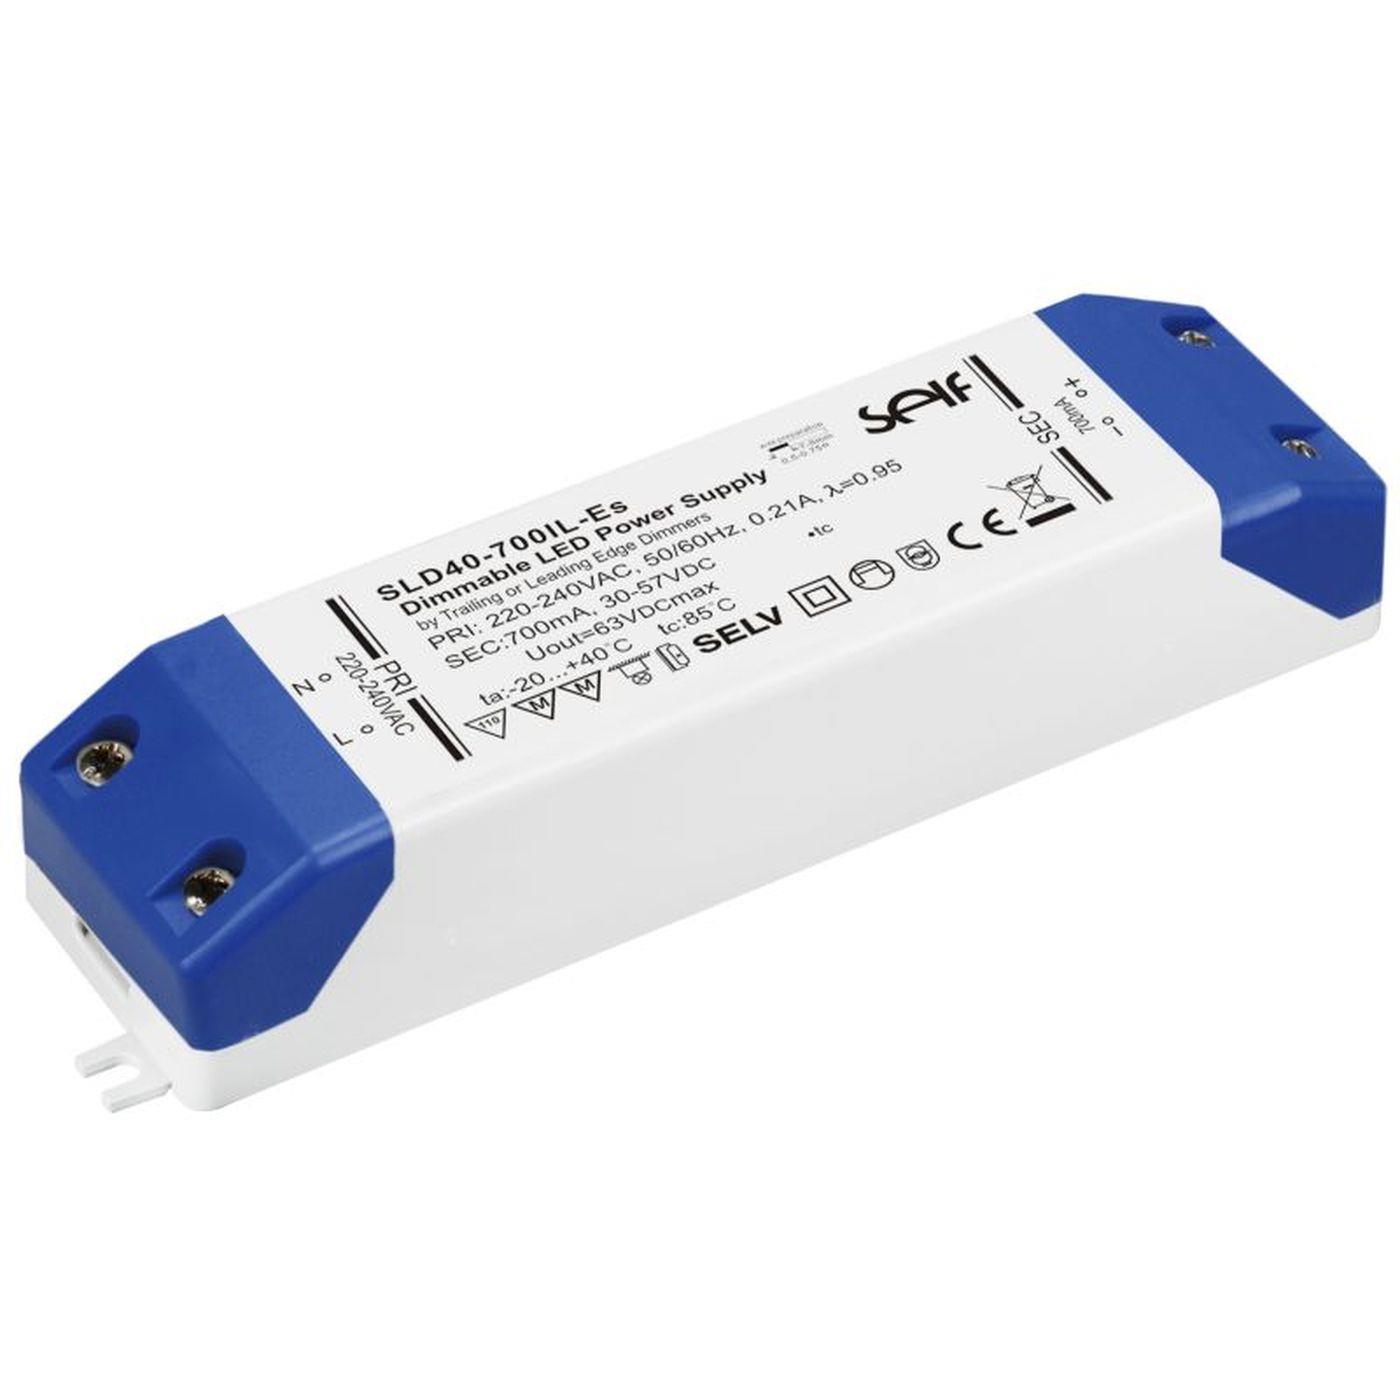 SLD40-900IL-ES 40W 900mA 22...44VDC Constant current LED power supply Driver Transformer Triac Dimmable